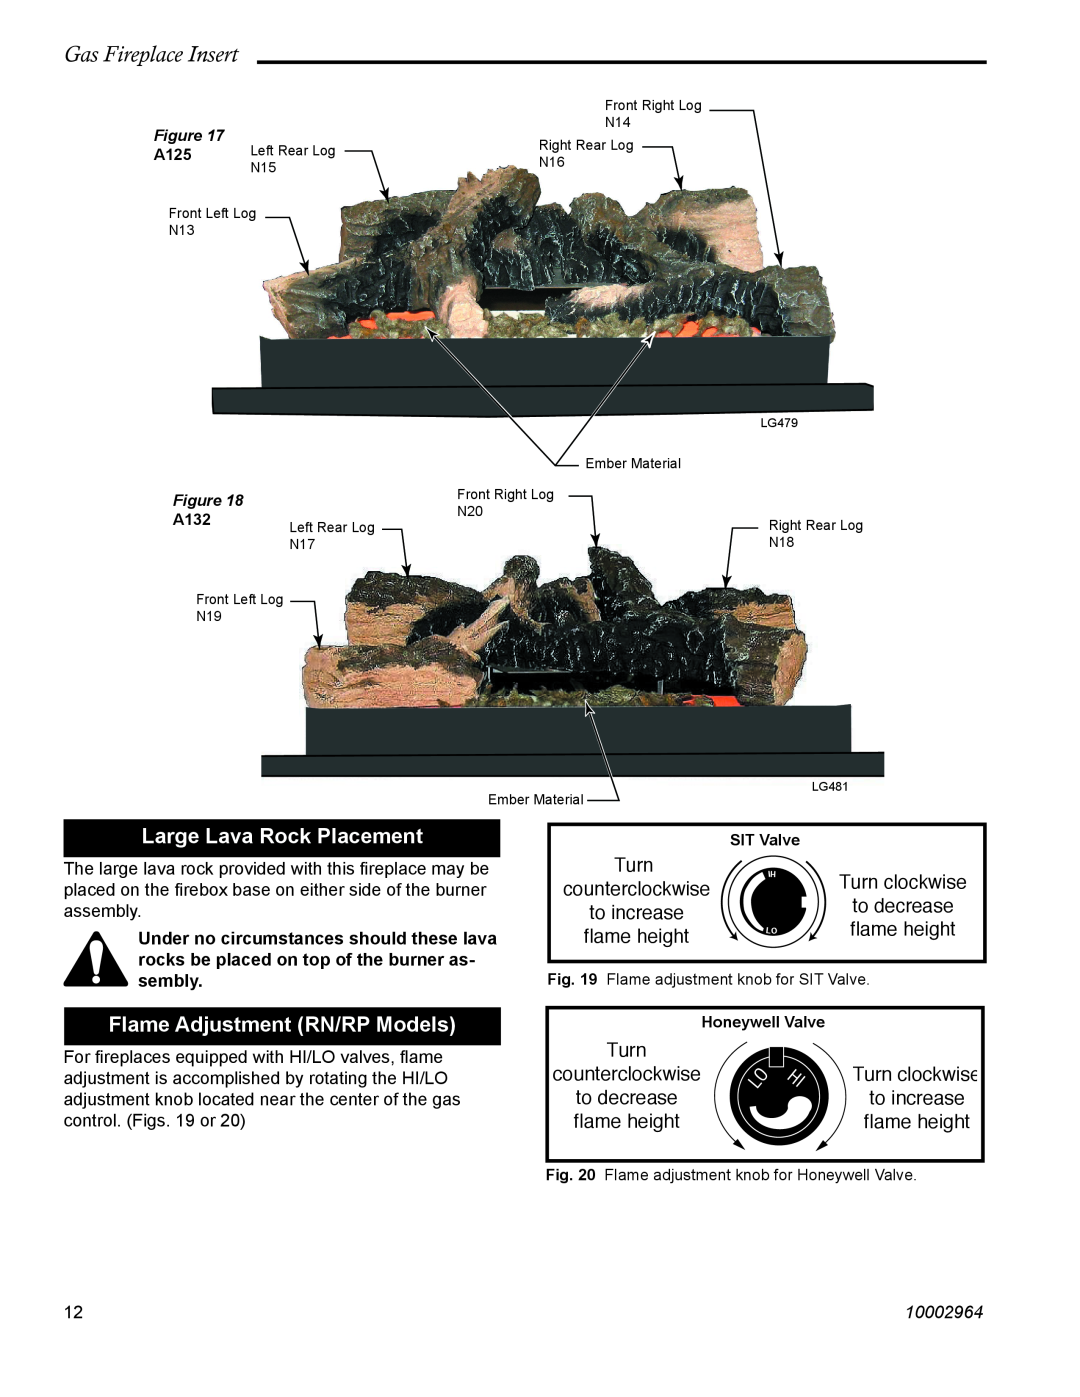 CFM Corporation A125 Large Lava Rock Placement, Flame Adjustment RN/RP Models, Gas Fireplace Insert, Turn, to increase 